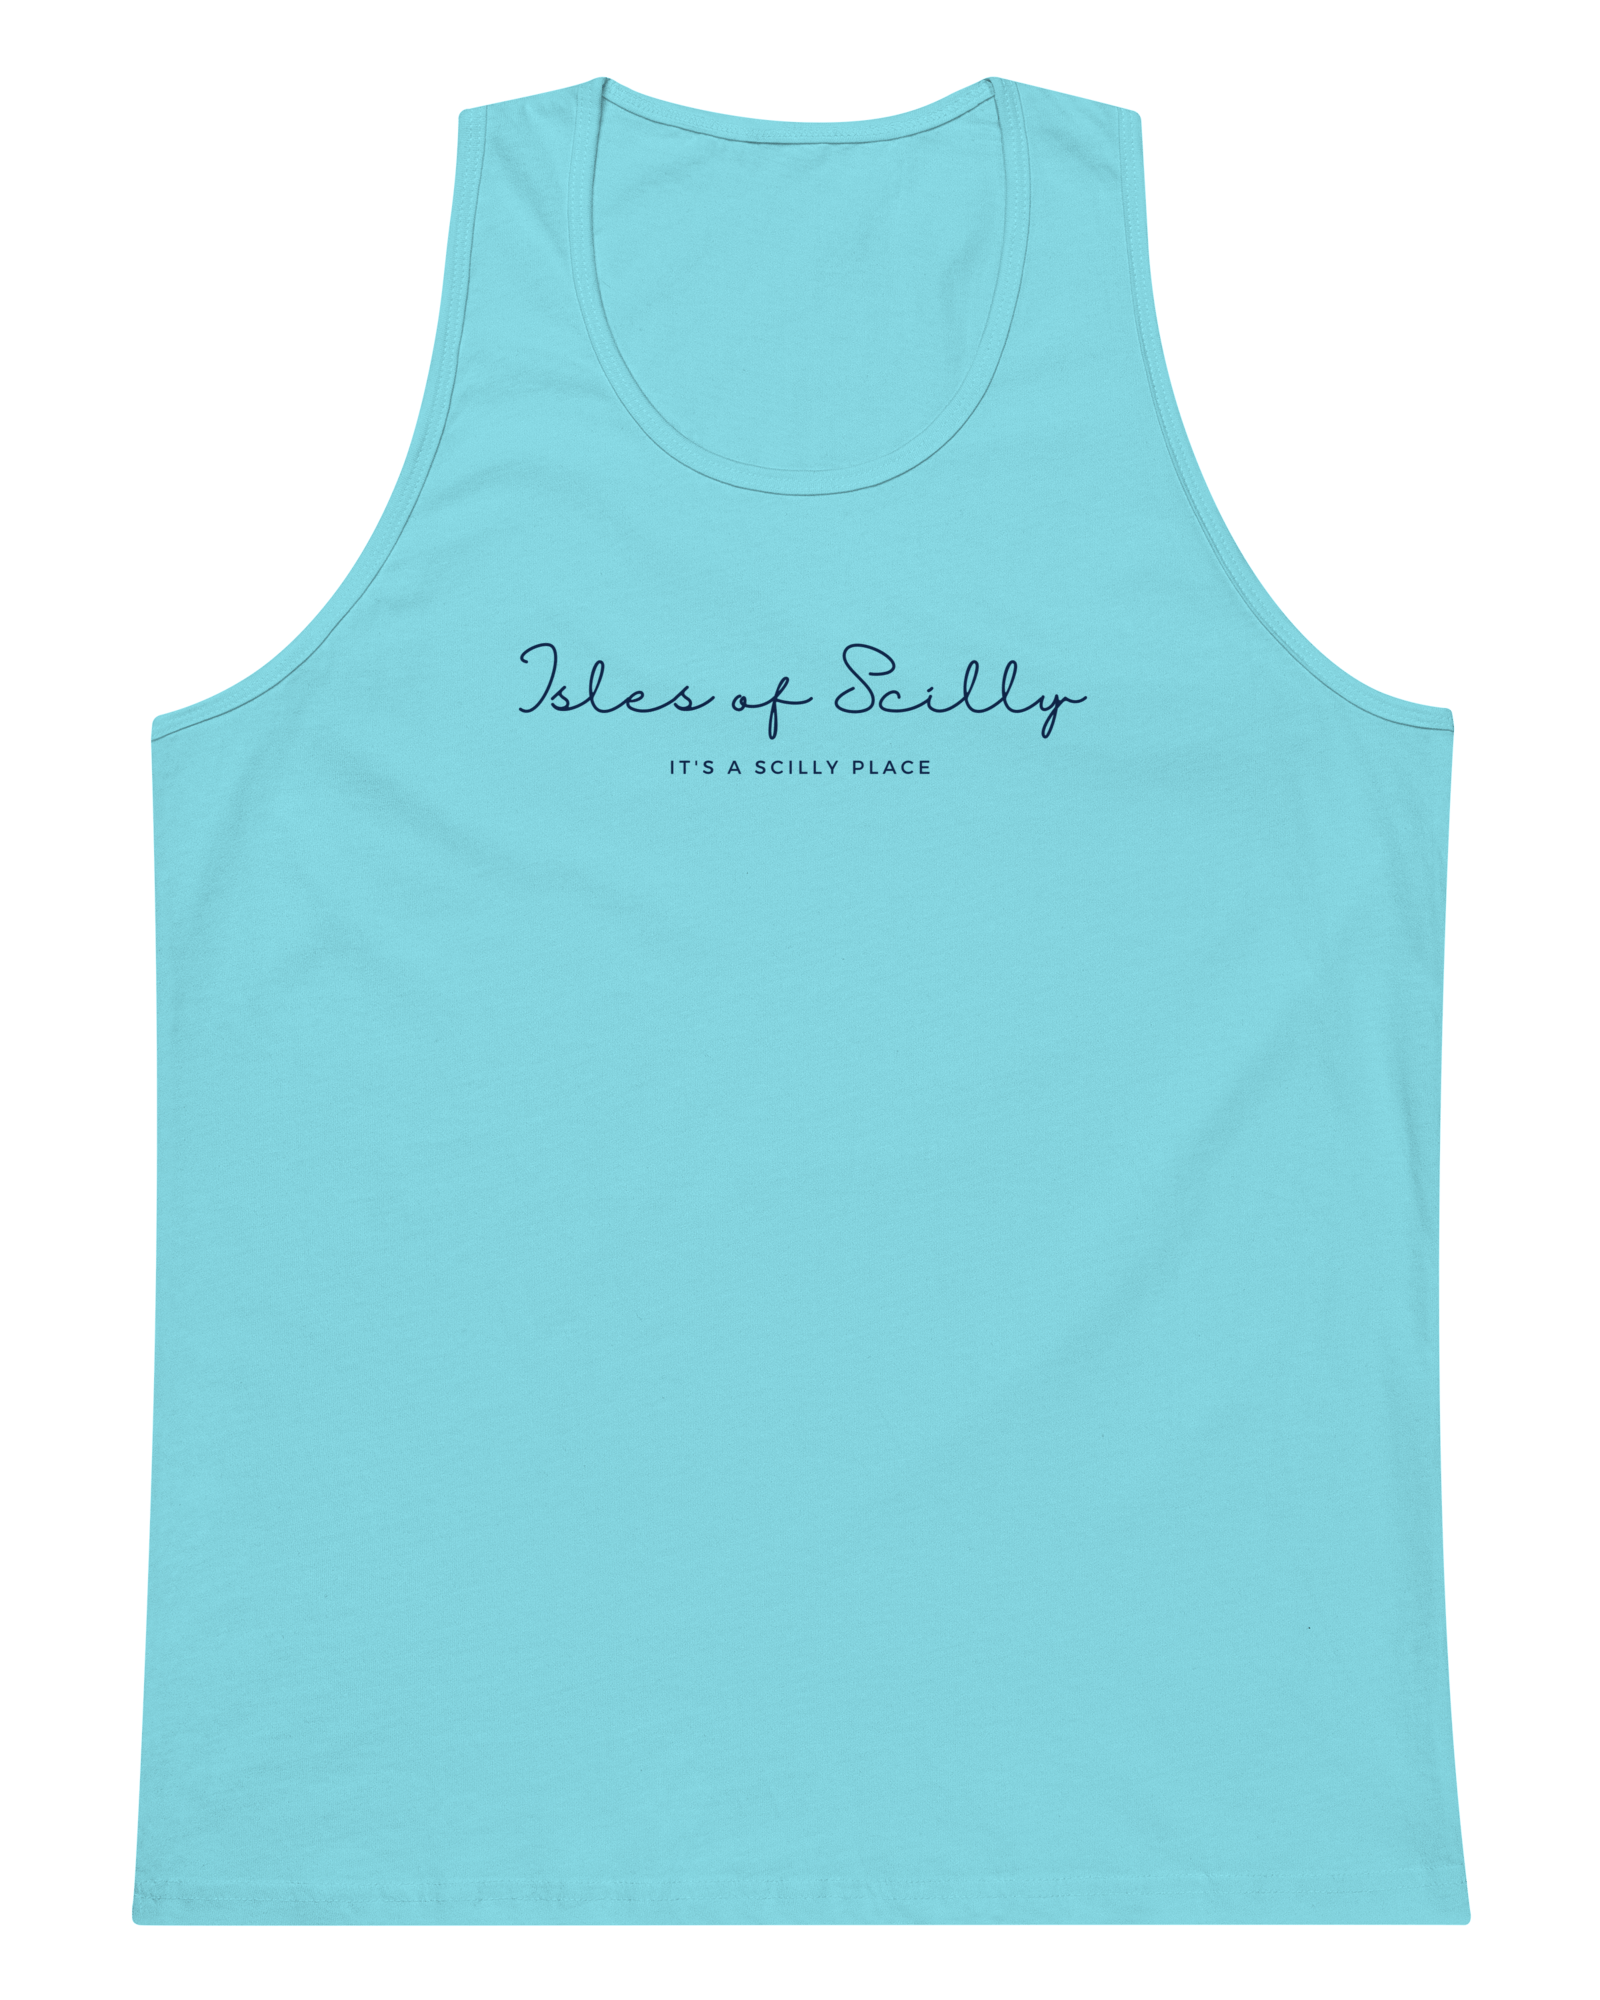 Isles of Scilly, It's A Scilly Place | Men’s Vest Shirts & Tops Jolly & Goode